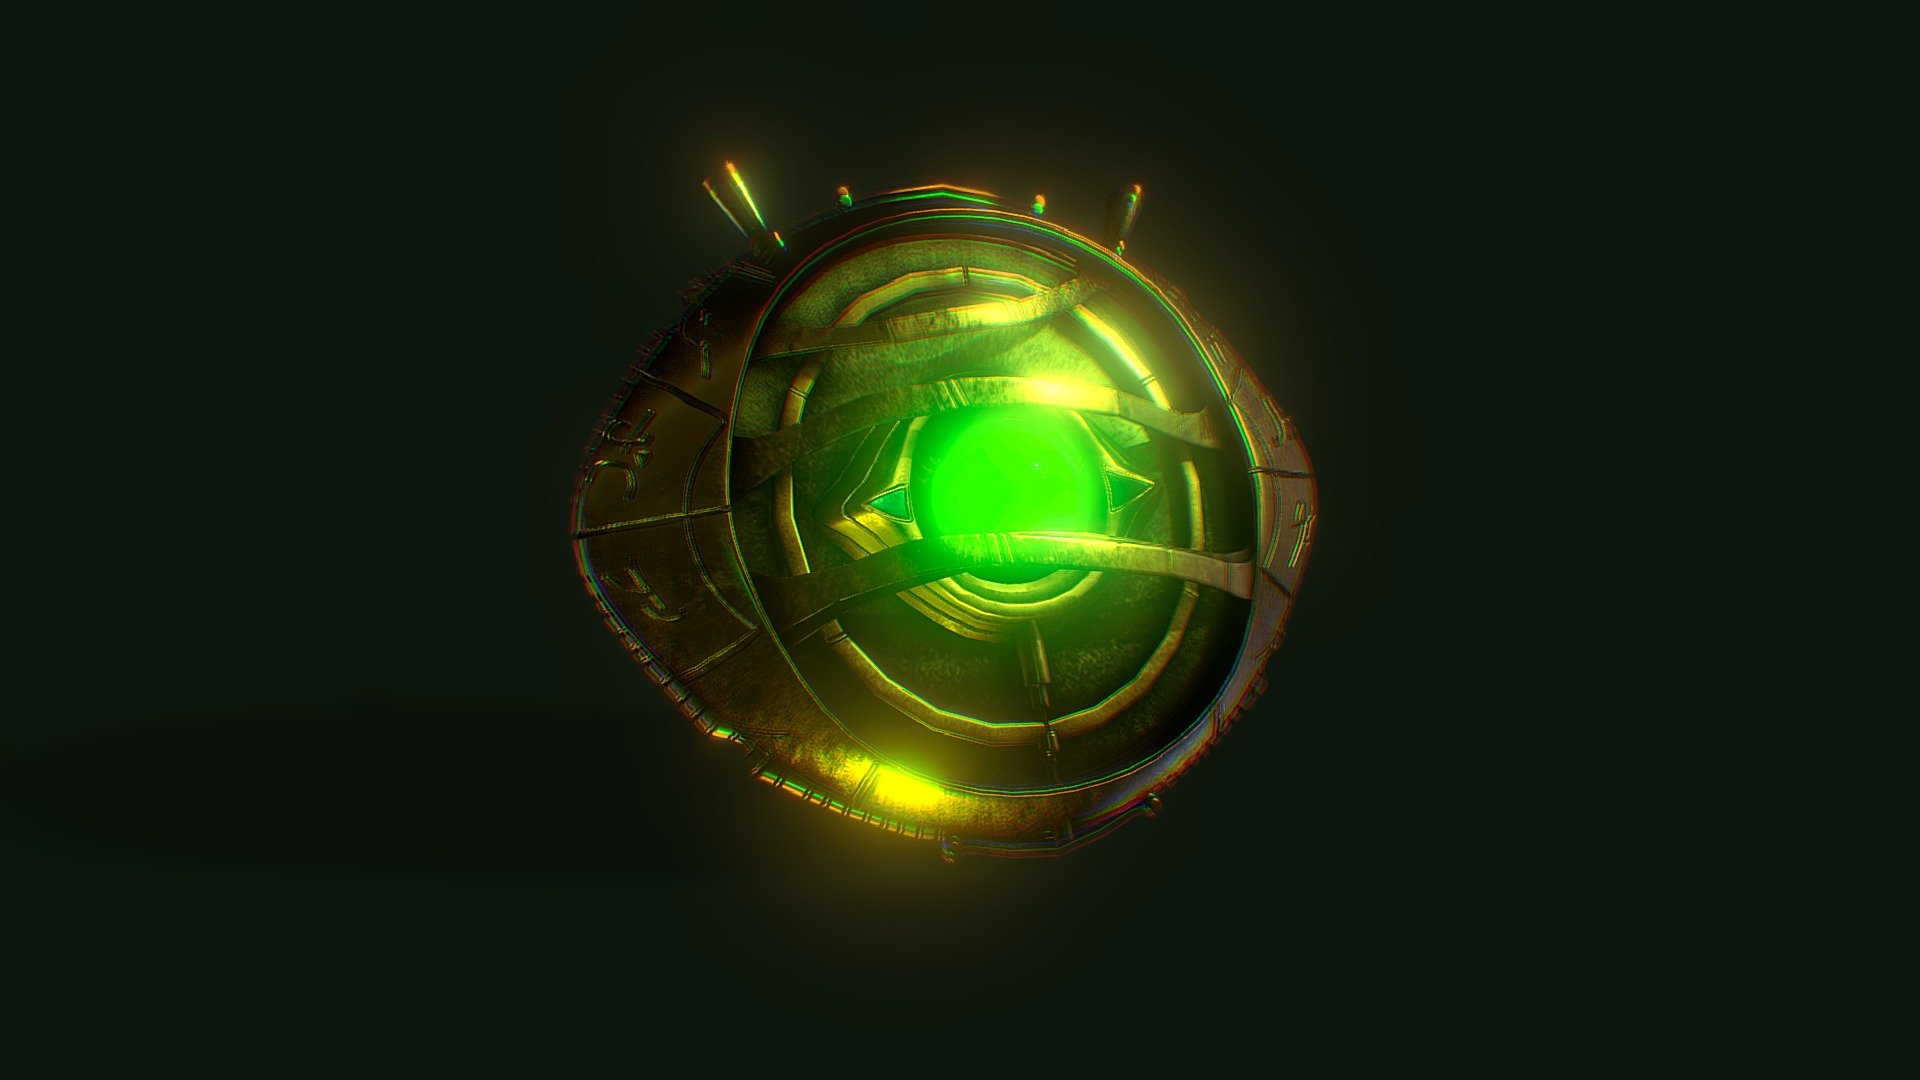 Doctor Stange's Eye of Agamotto from Marvel Cinematic Universe.
Modelled in Maya and textured in Photoshop 3d model